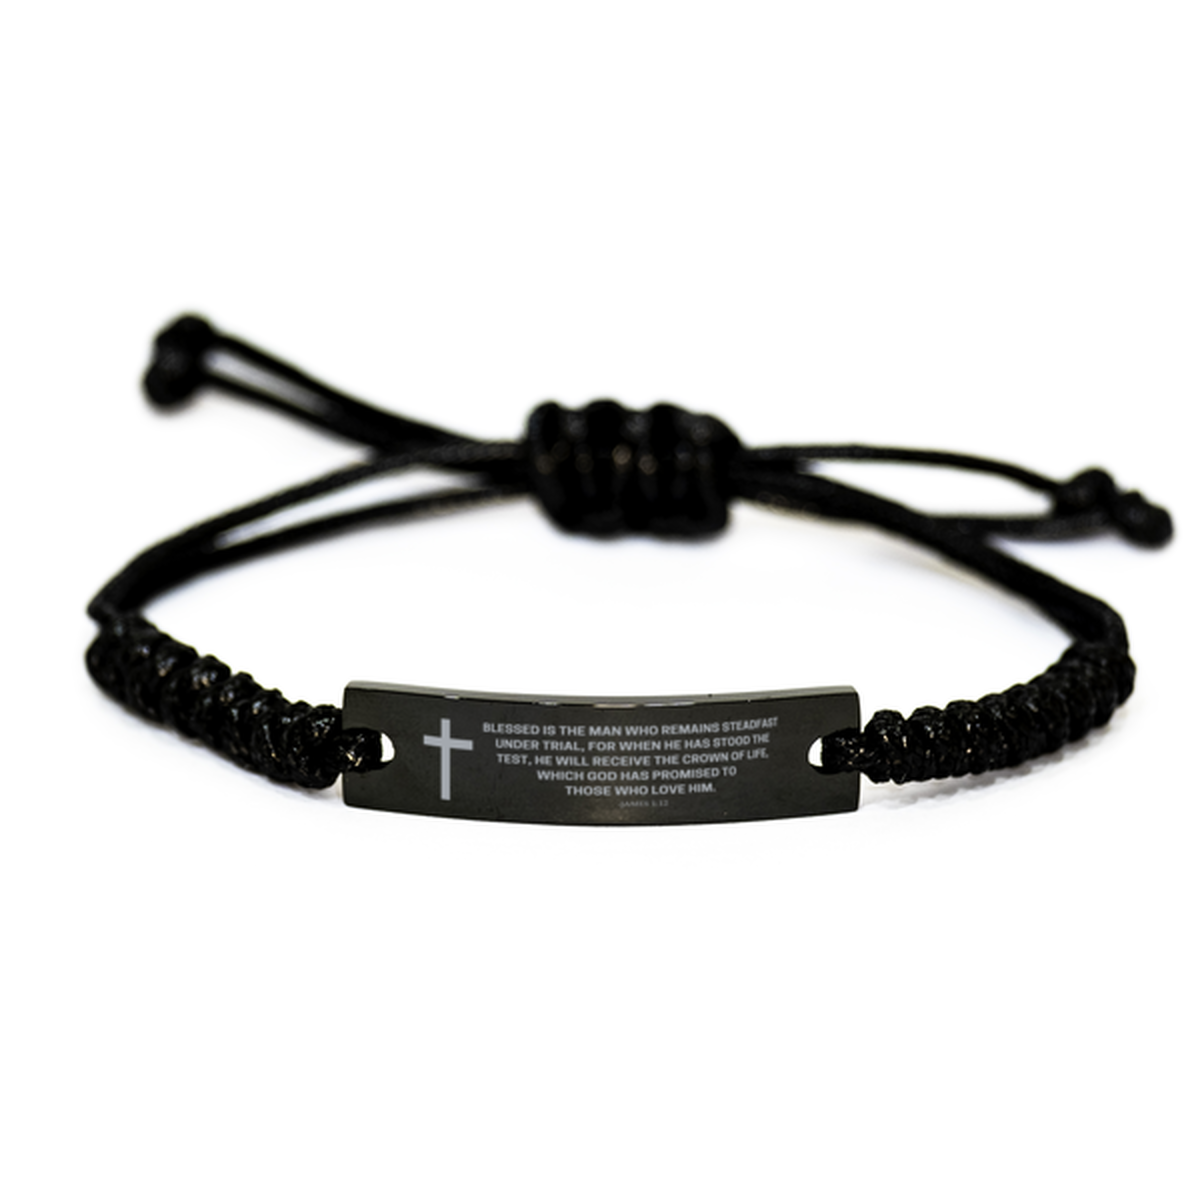 Baptism Gifts For Teenage Boys Girls, Christian Bible Verse Black Rope Bracelet, Blessed is the man who remains, Catholic Confirmation Gifts for Son, Godson, Grandson, Nephew